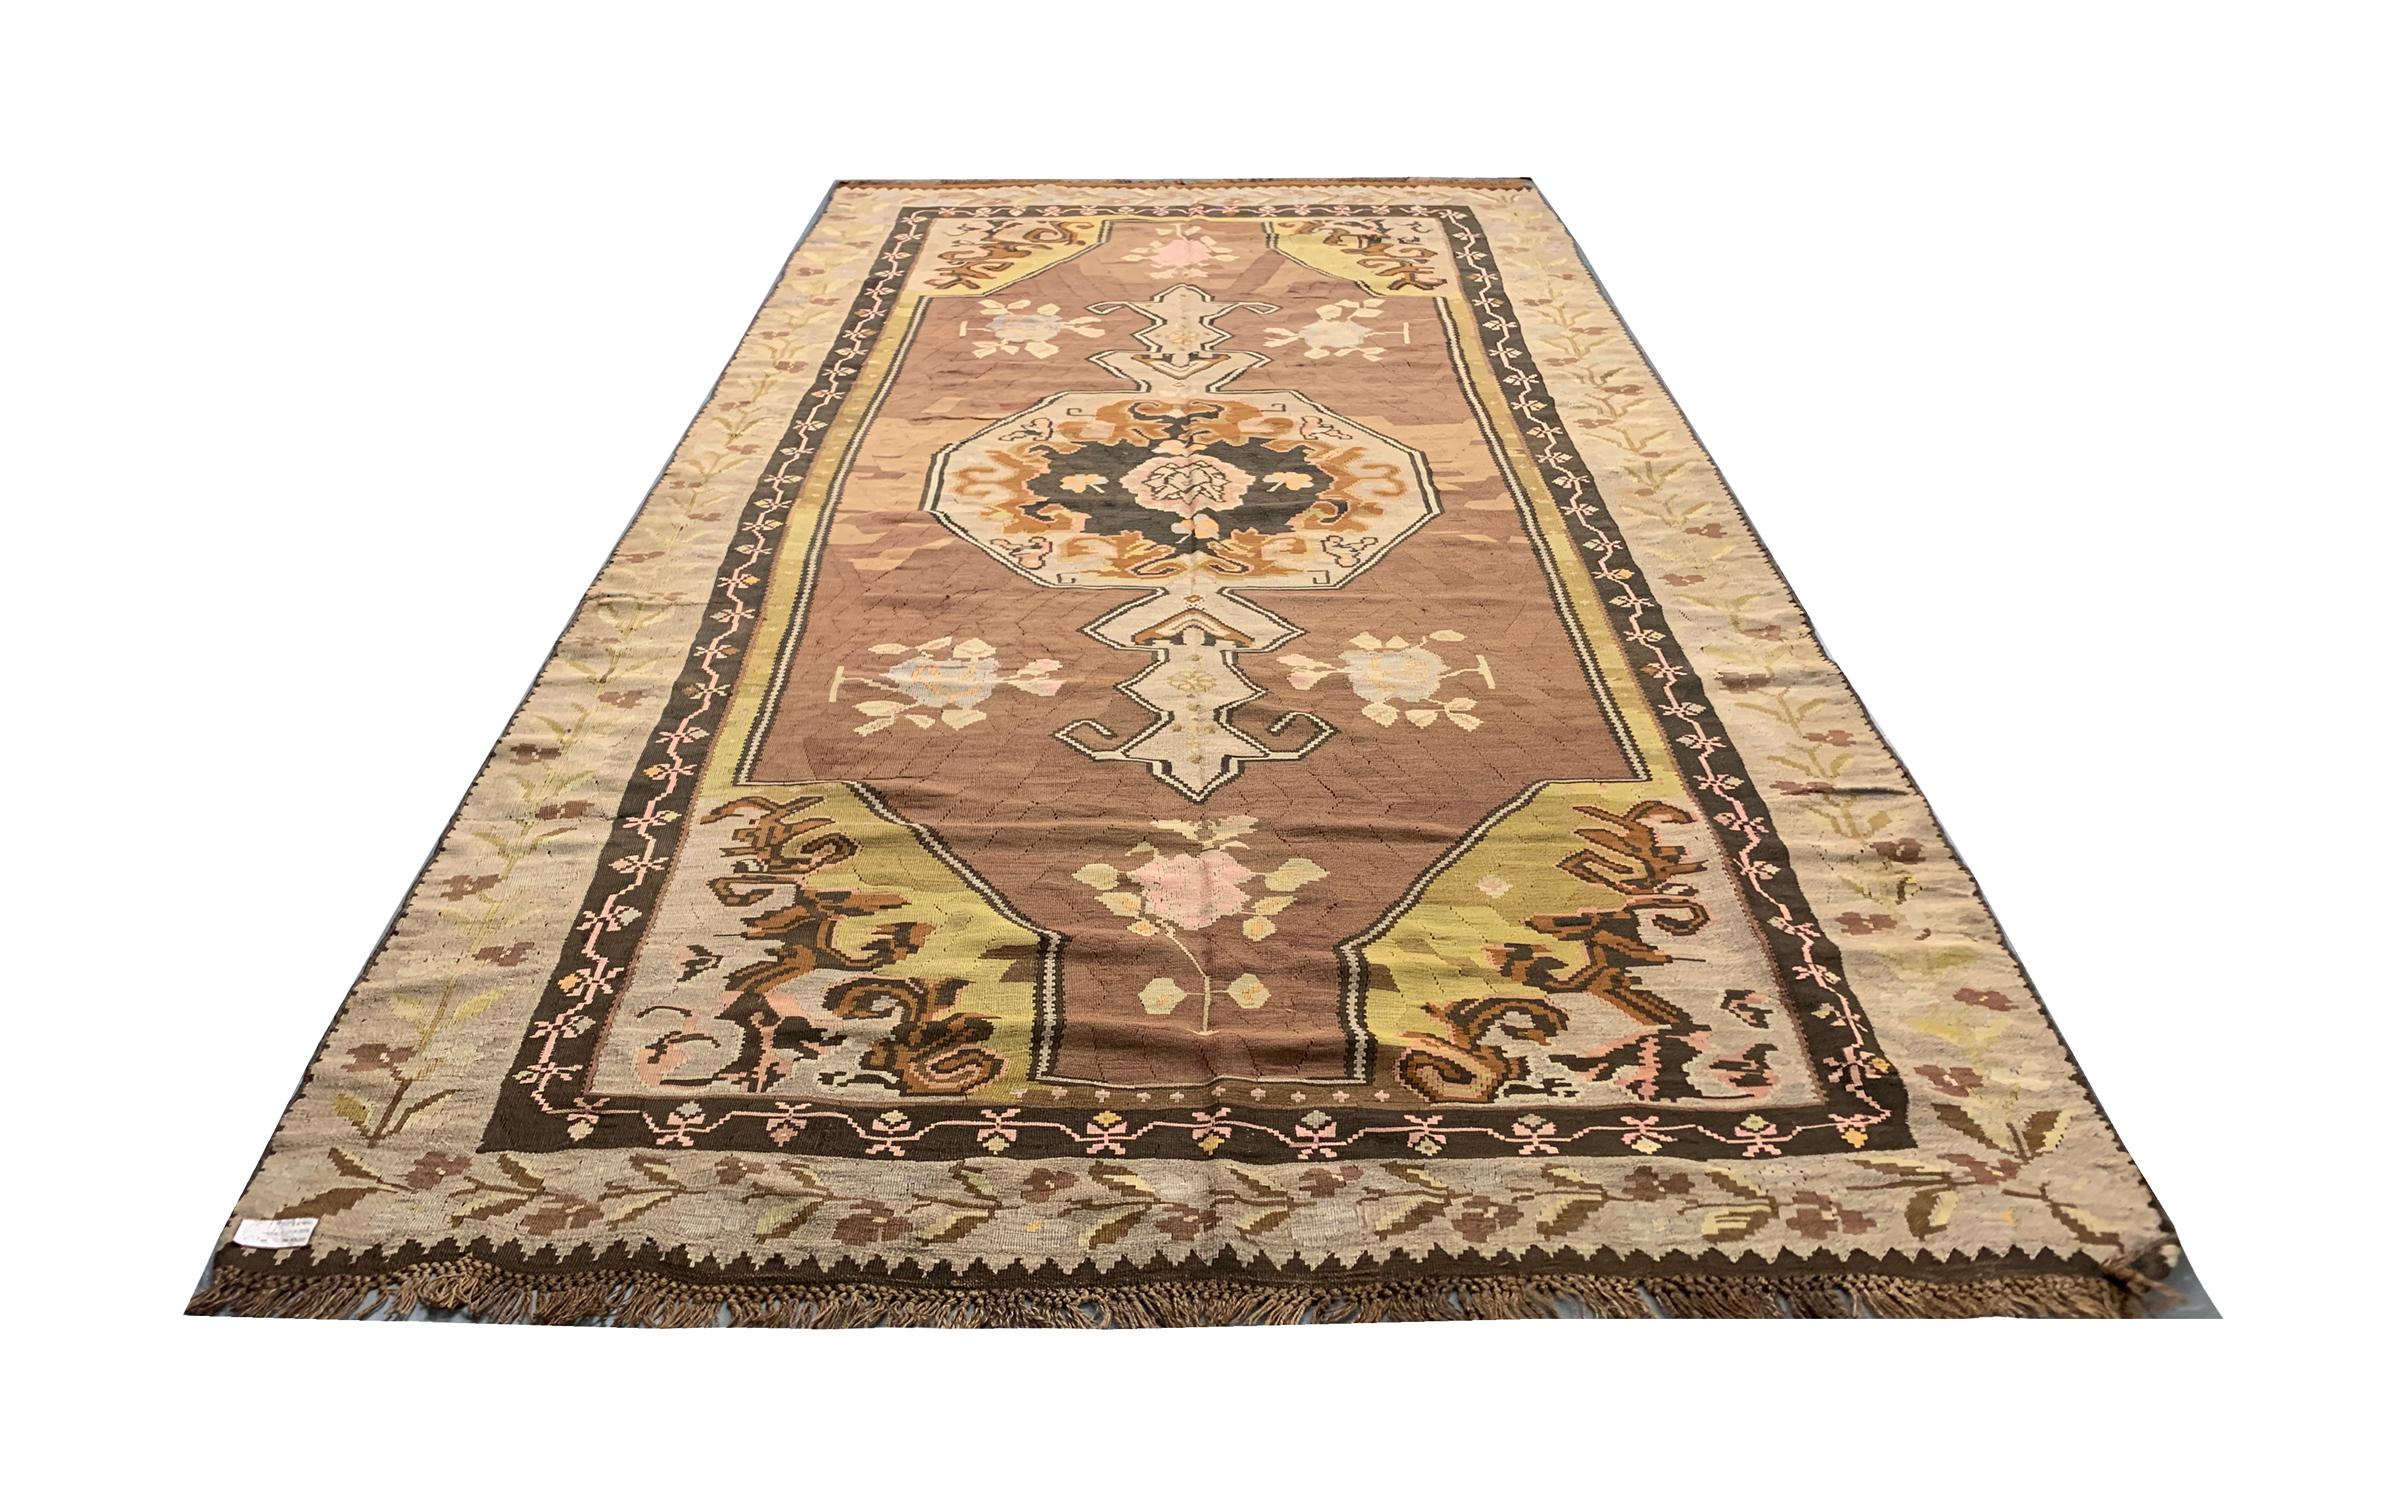 This elegant handwoven kilim is an excellent example of a caucasian Karabagh Kilim rug. Woven with a bold geometric design with accents of brown, beige, cream and green. Featuring floral and geometric patterns. 
Constructed with fine hand-spun wool